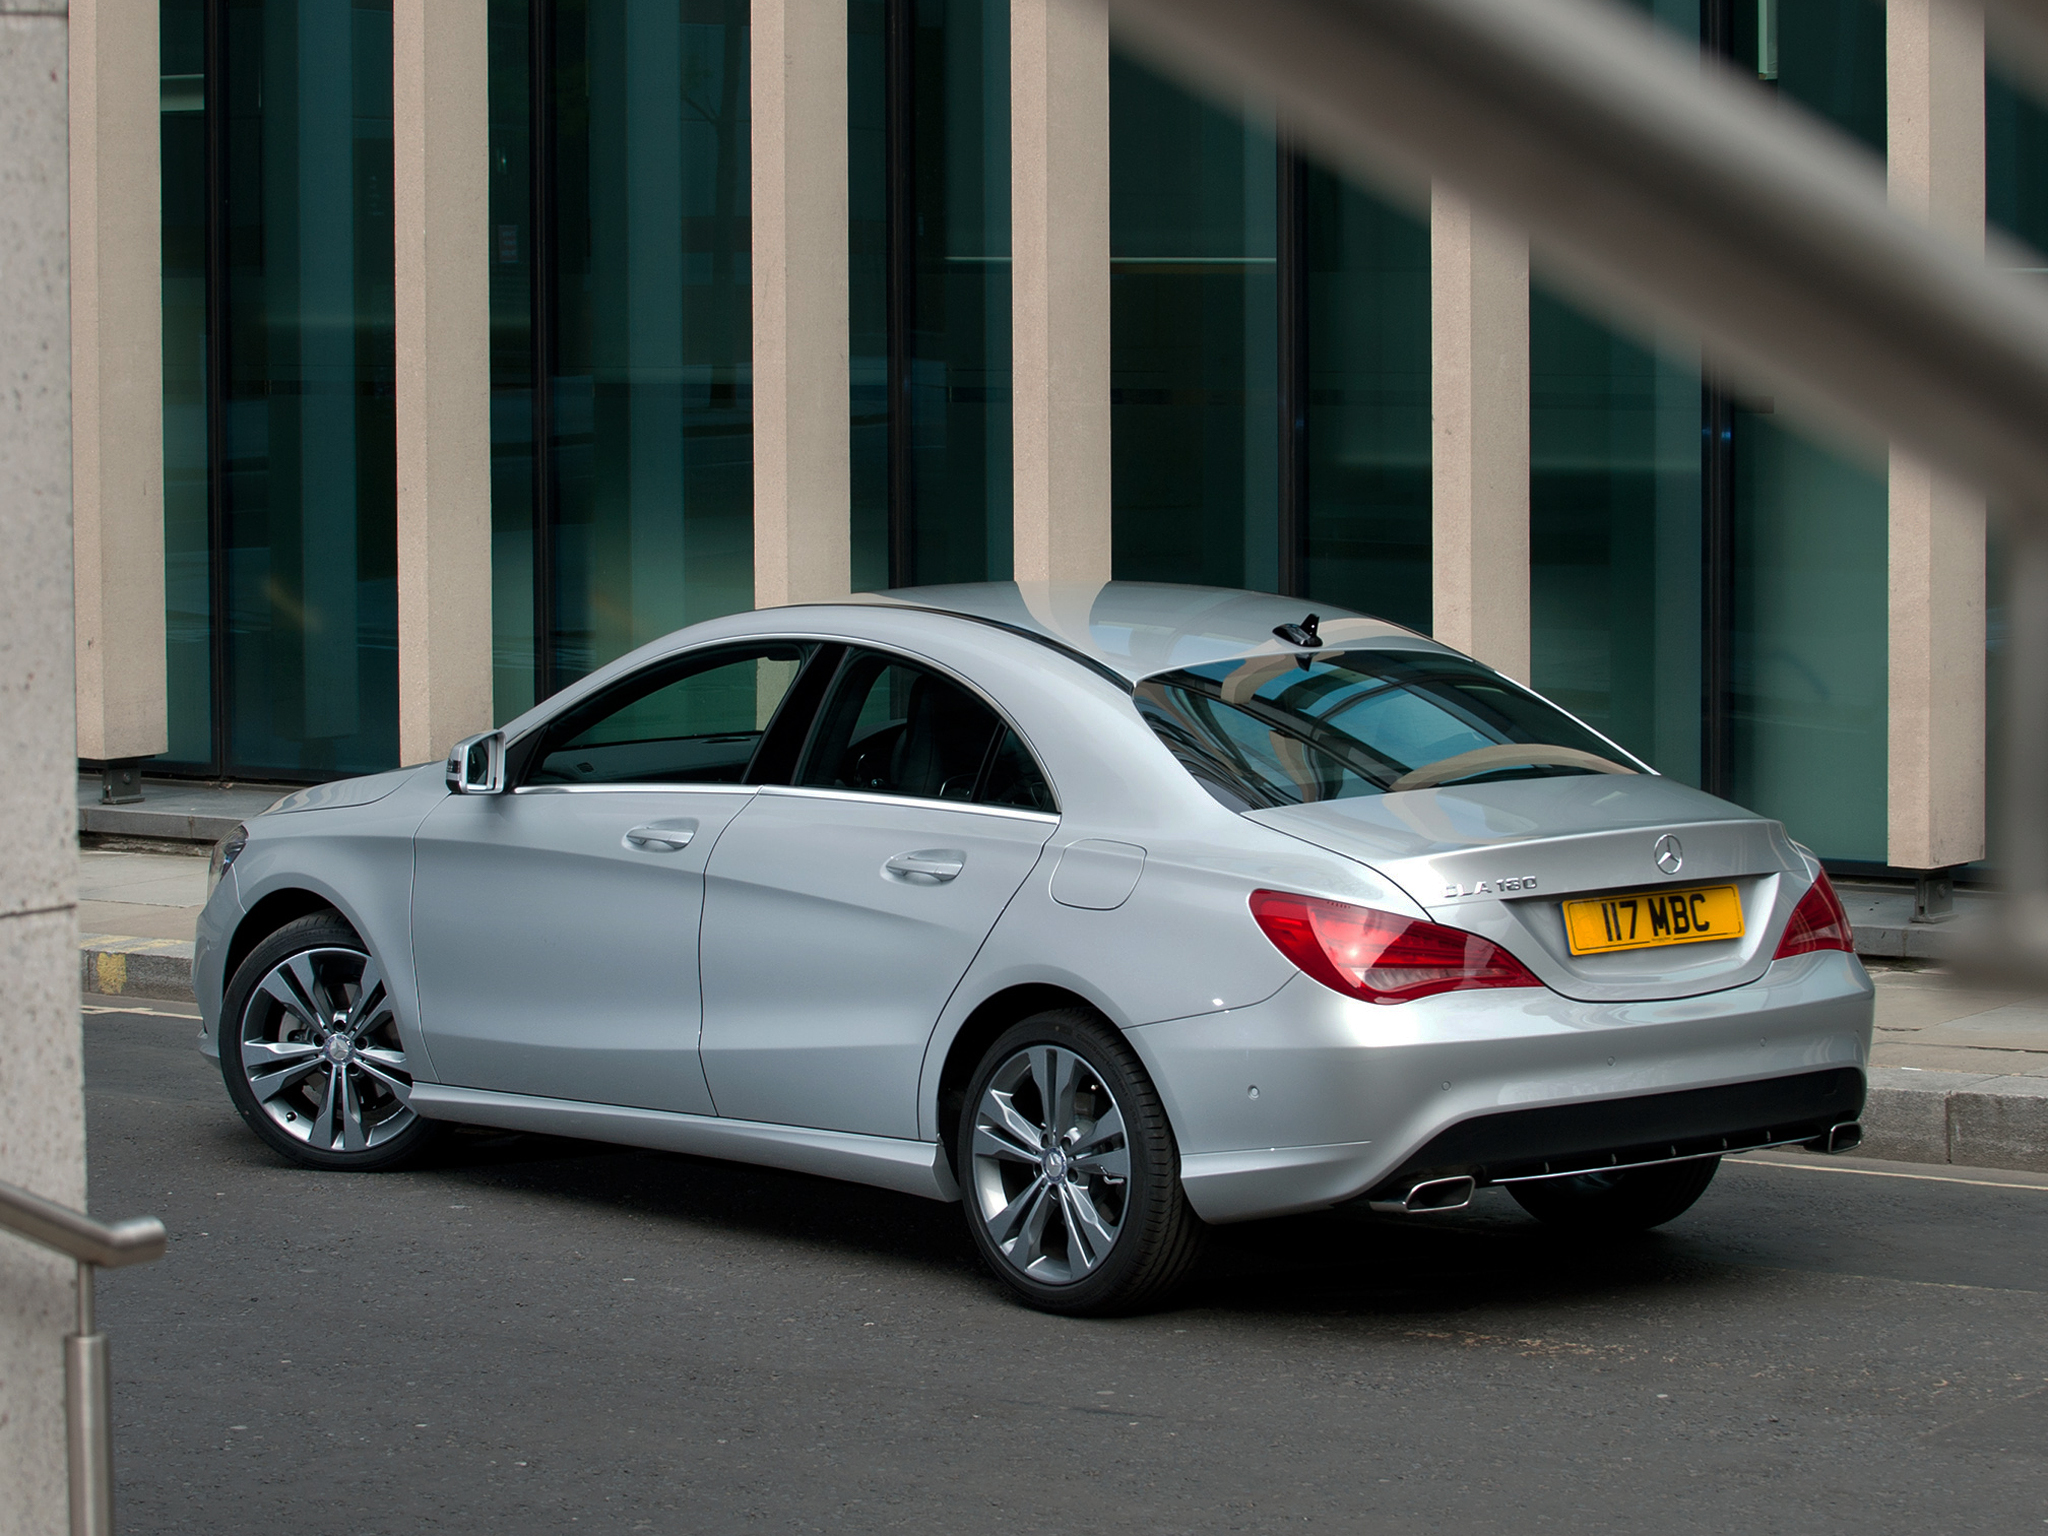 Windows Backgrounds cars, back view, rear view, mercedes benz, silver, silvery, cla 180